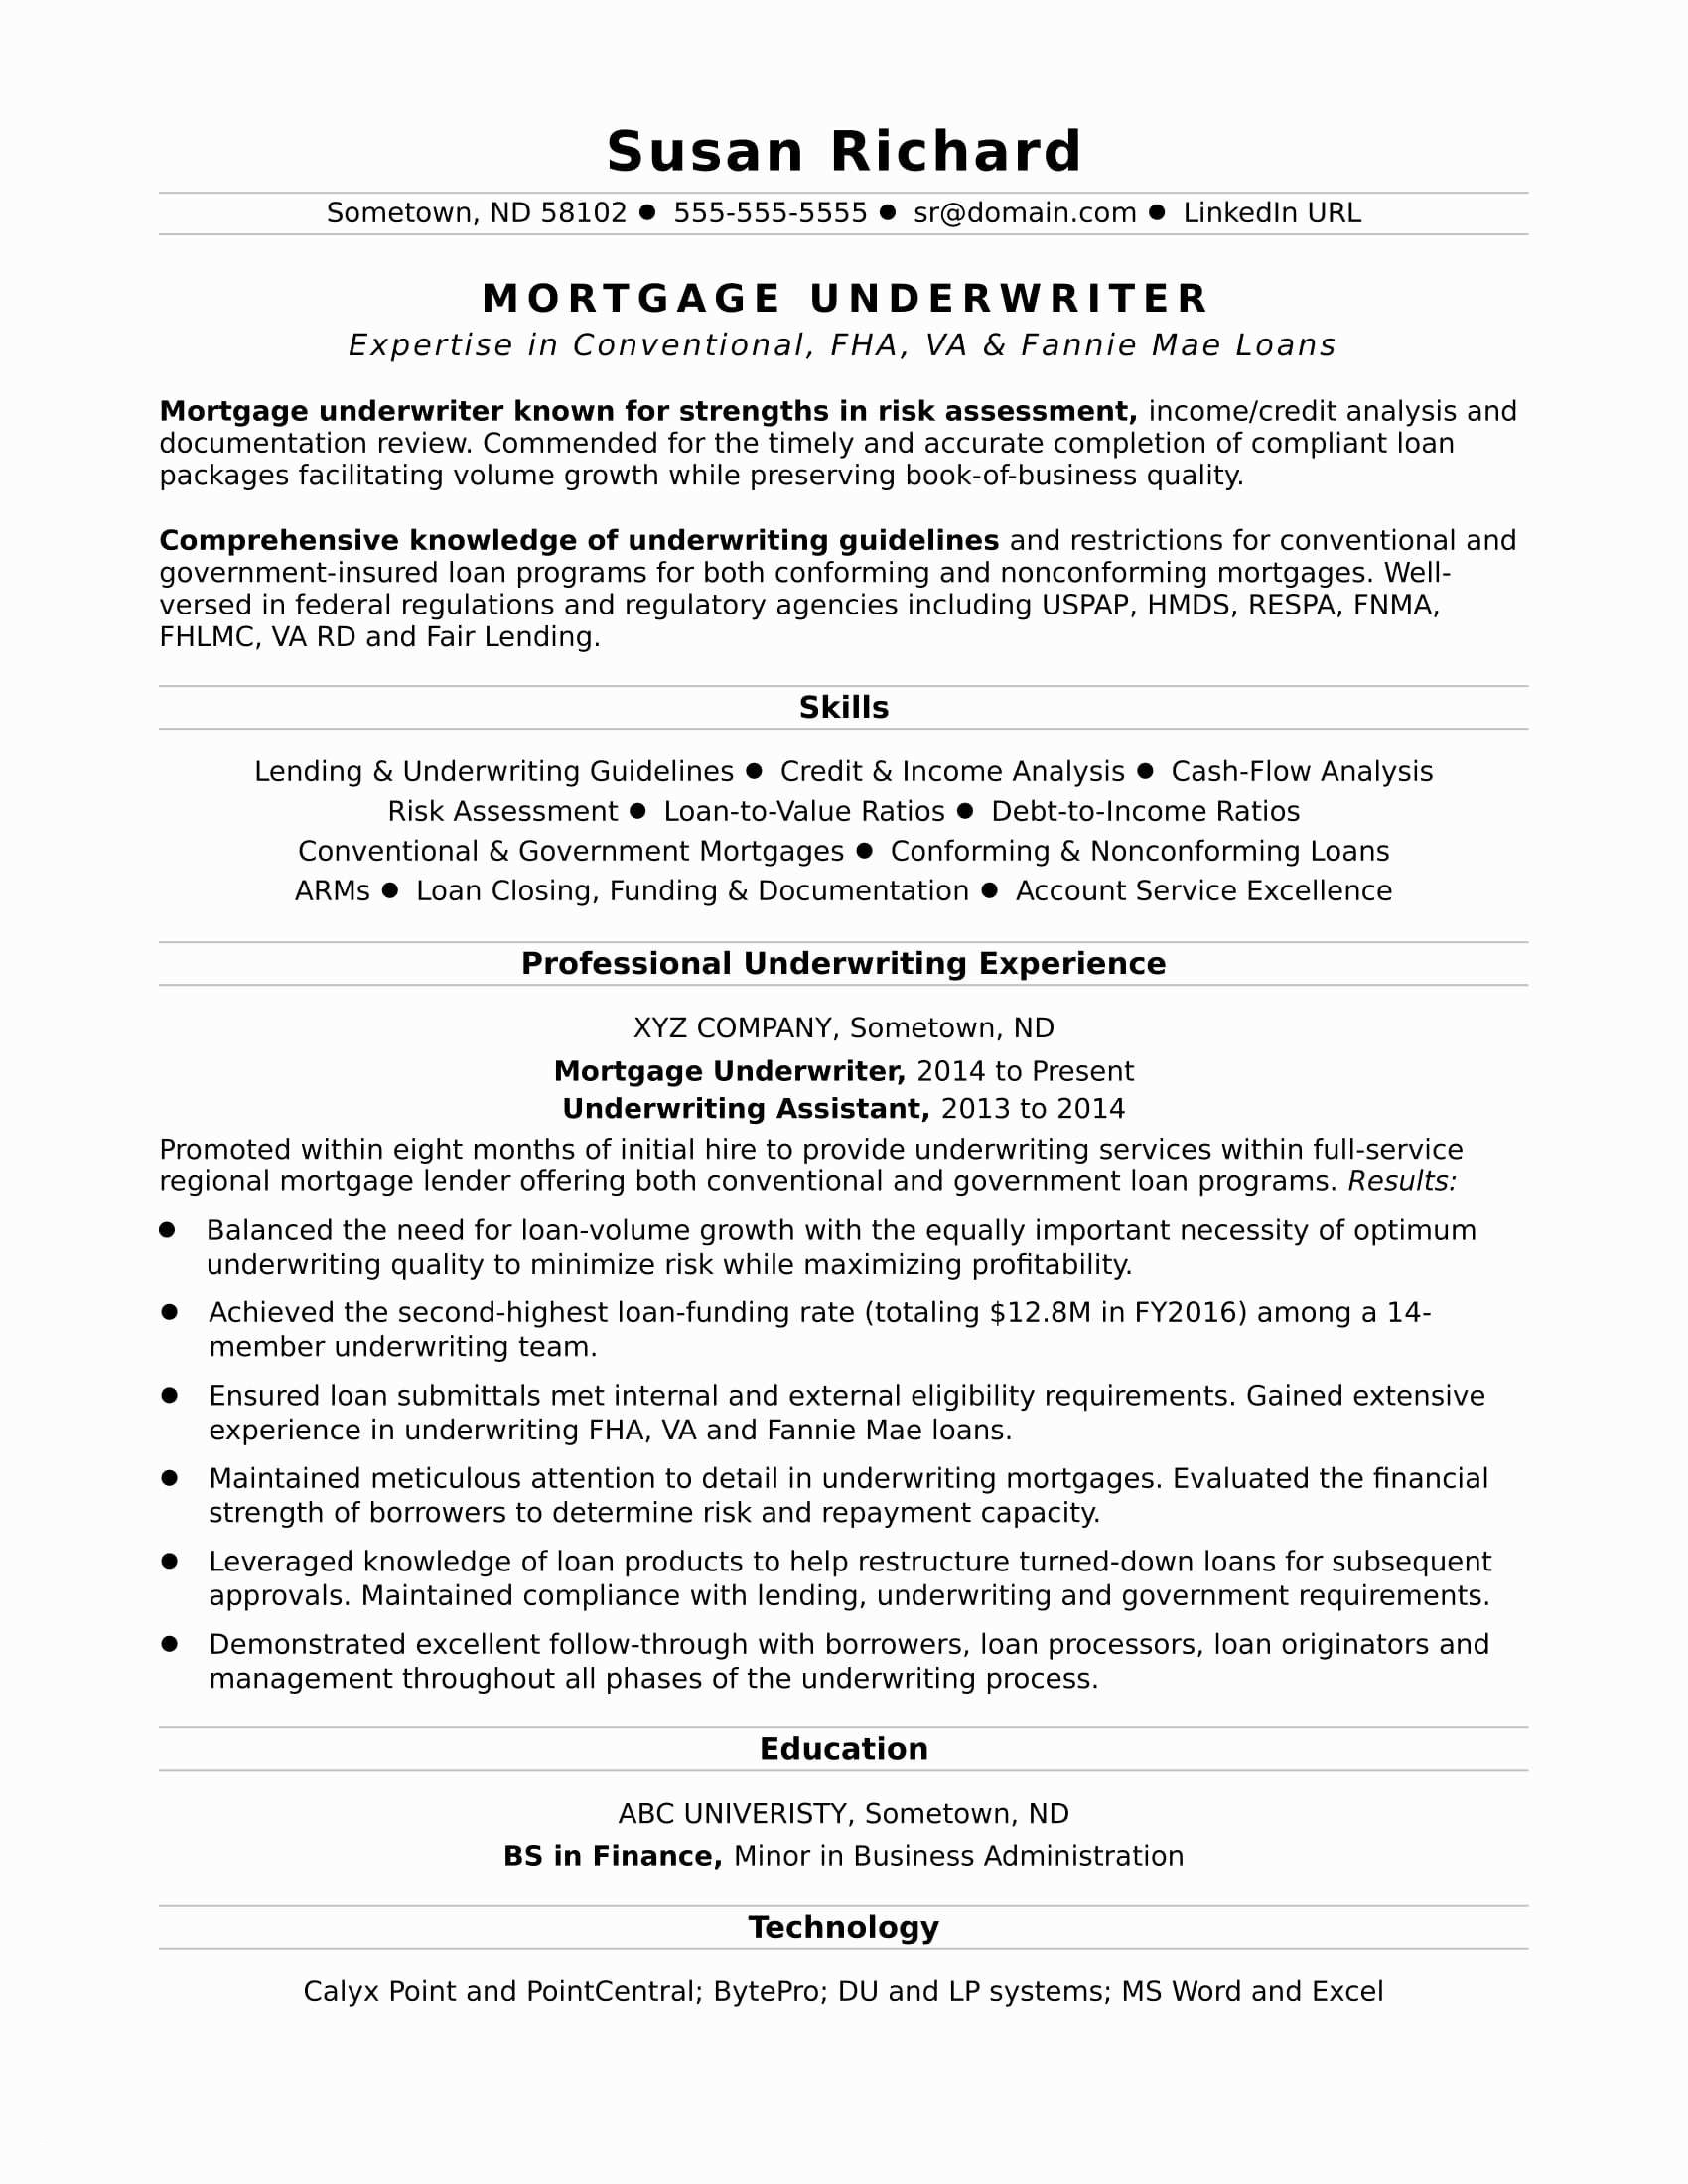 Education Cover Letter Template - Teaching Resume Cover Letter New Sample Cover Letter Template Lovely